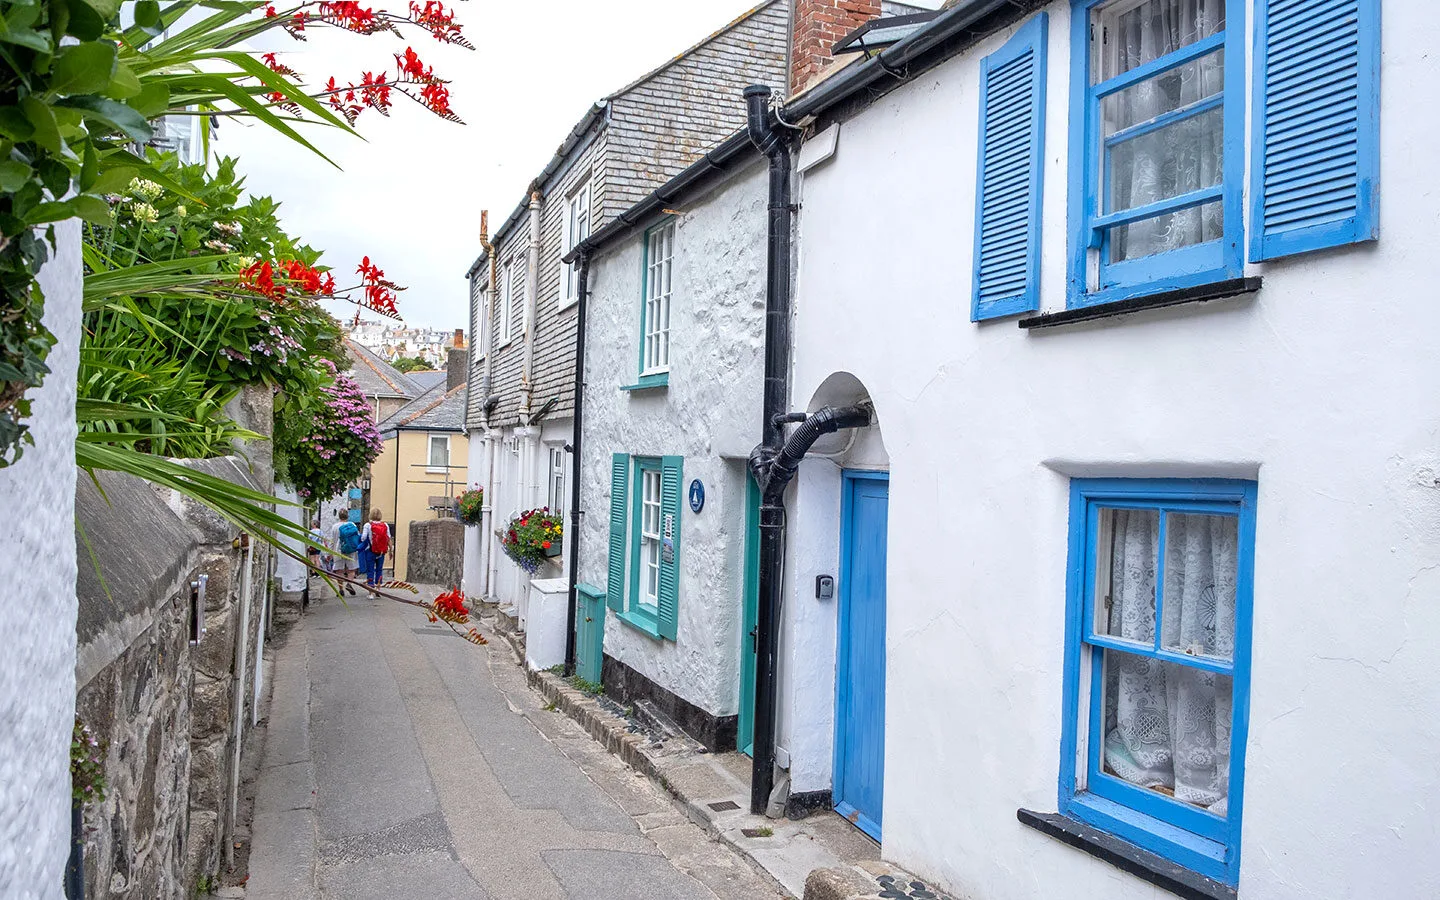 Whitewashed Cornish cottages in St Ives